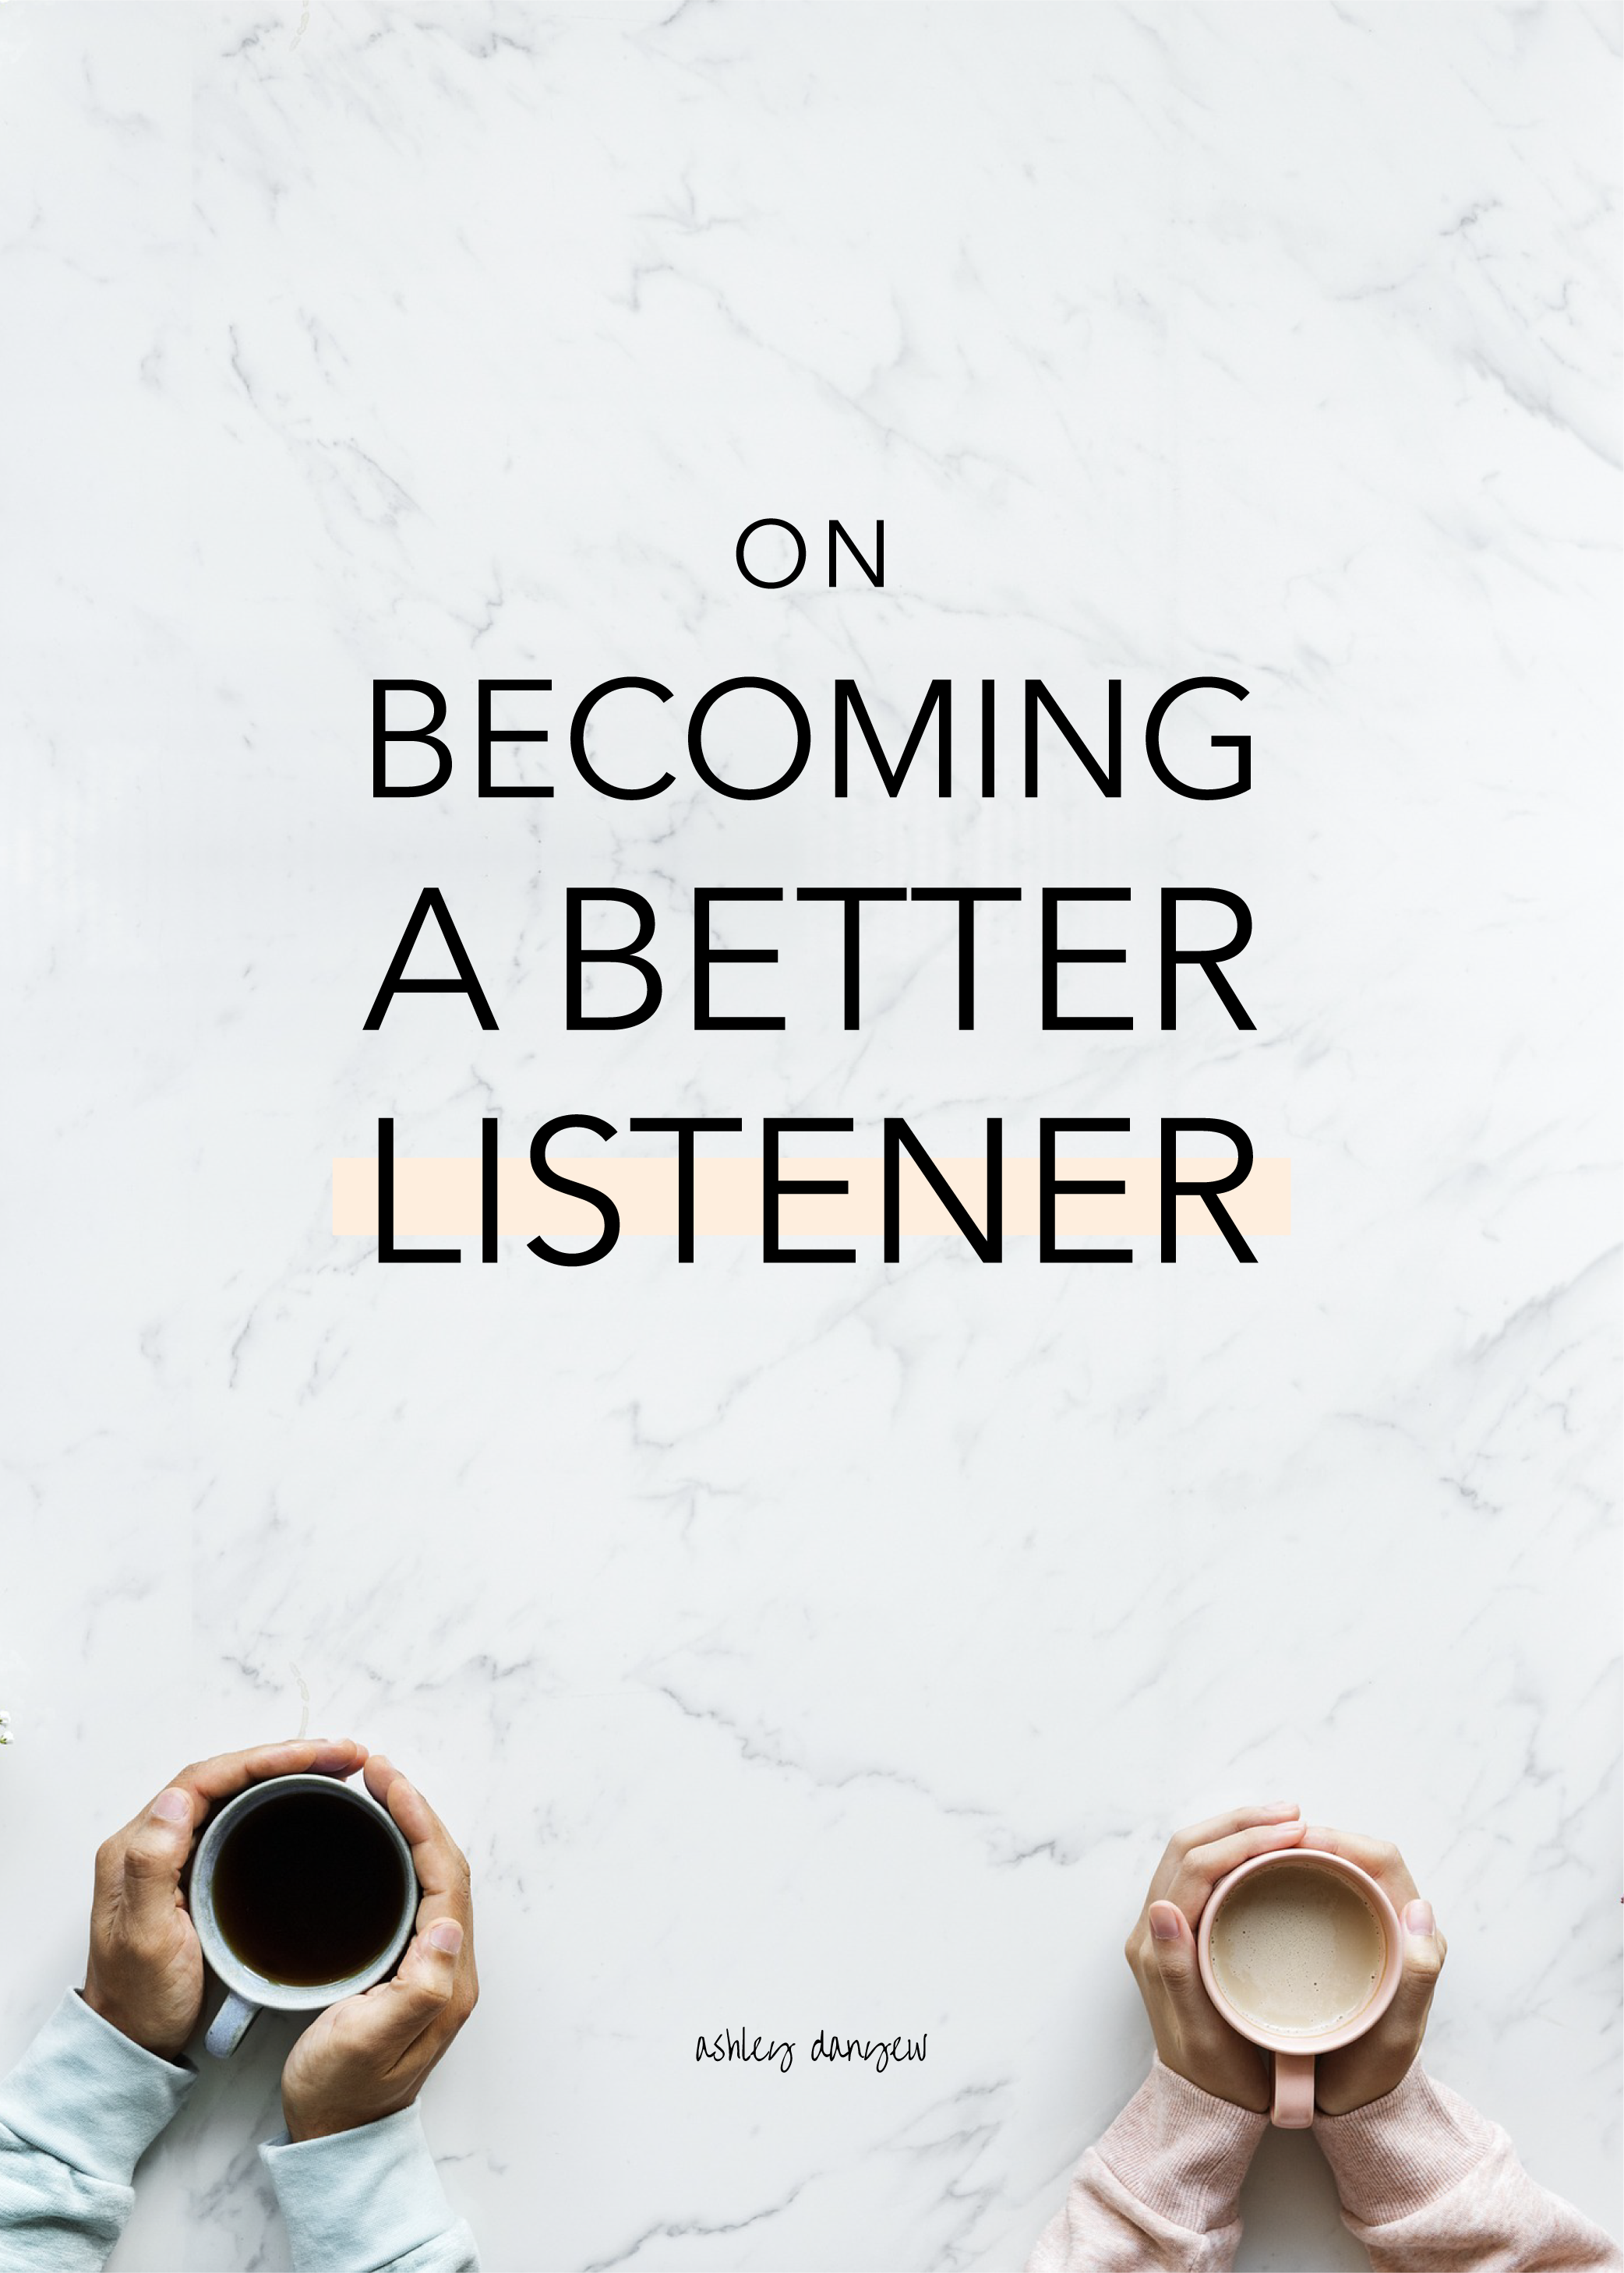 On Becoming a Better Listener